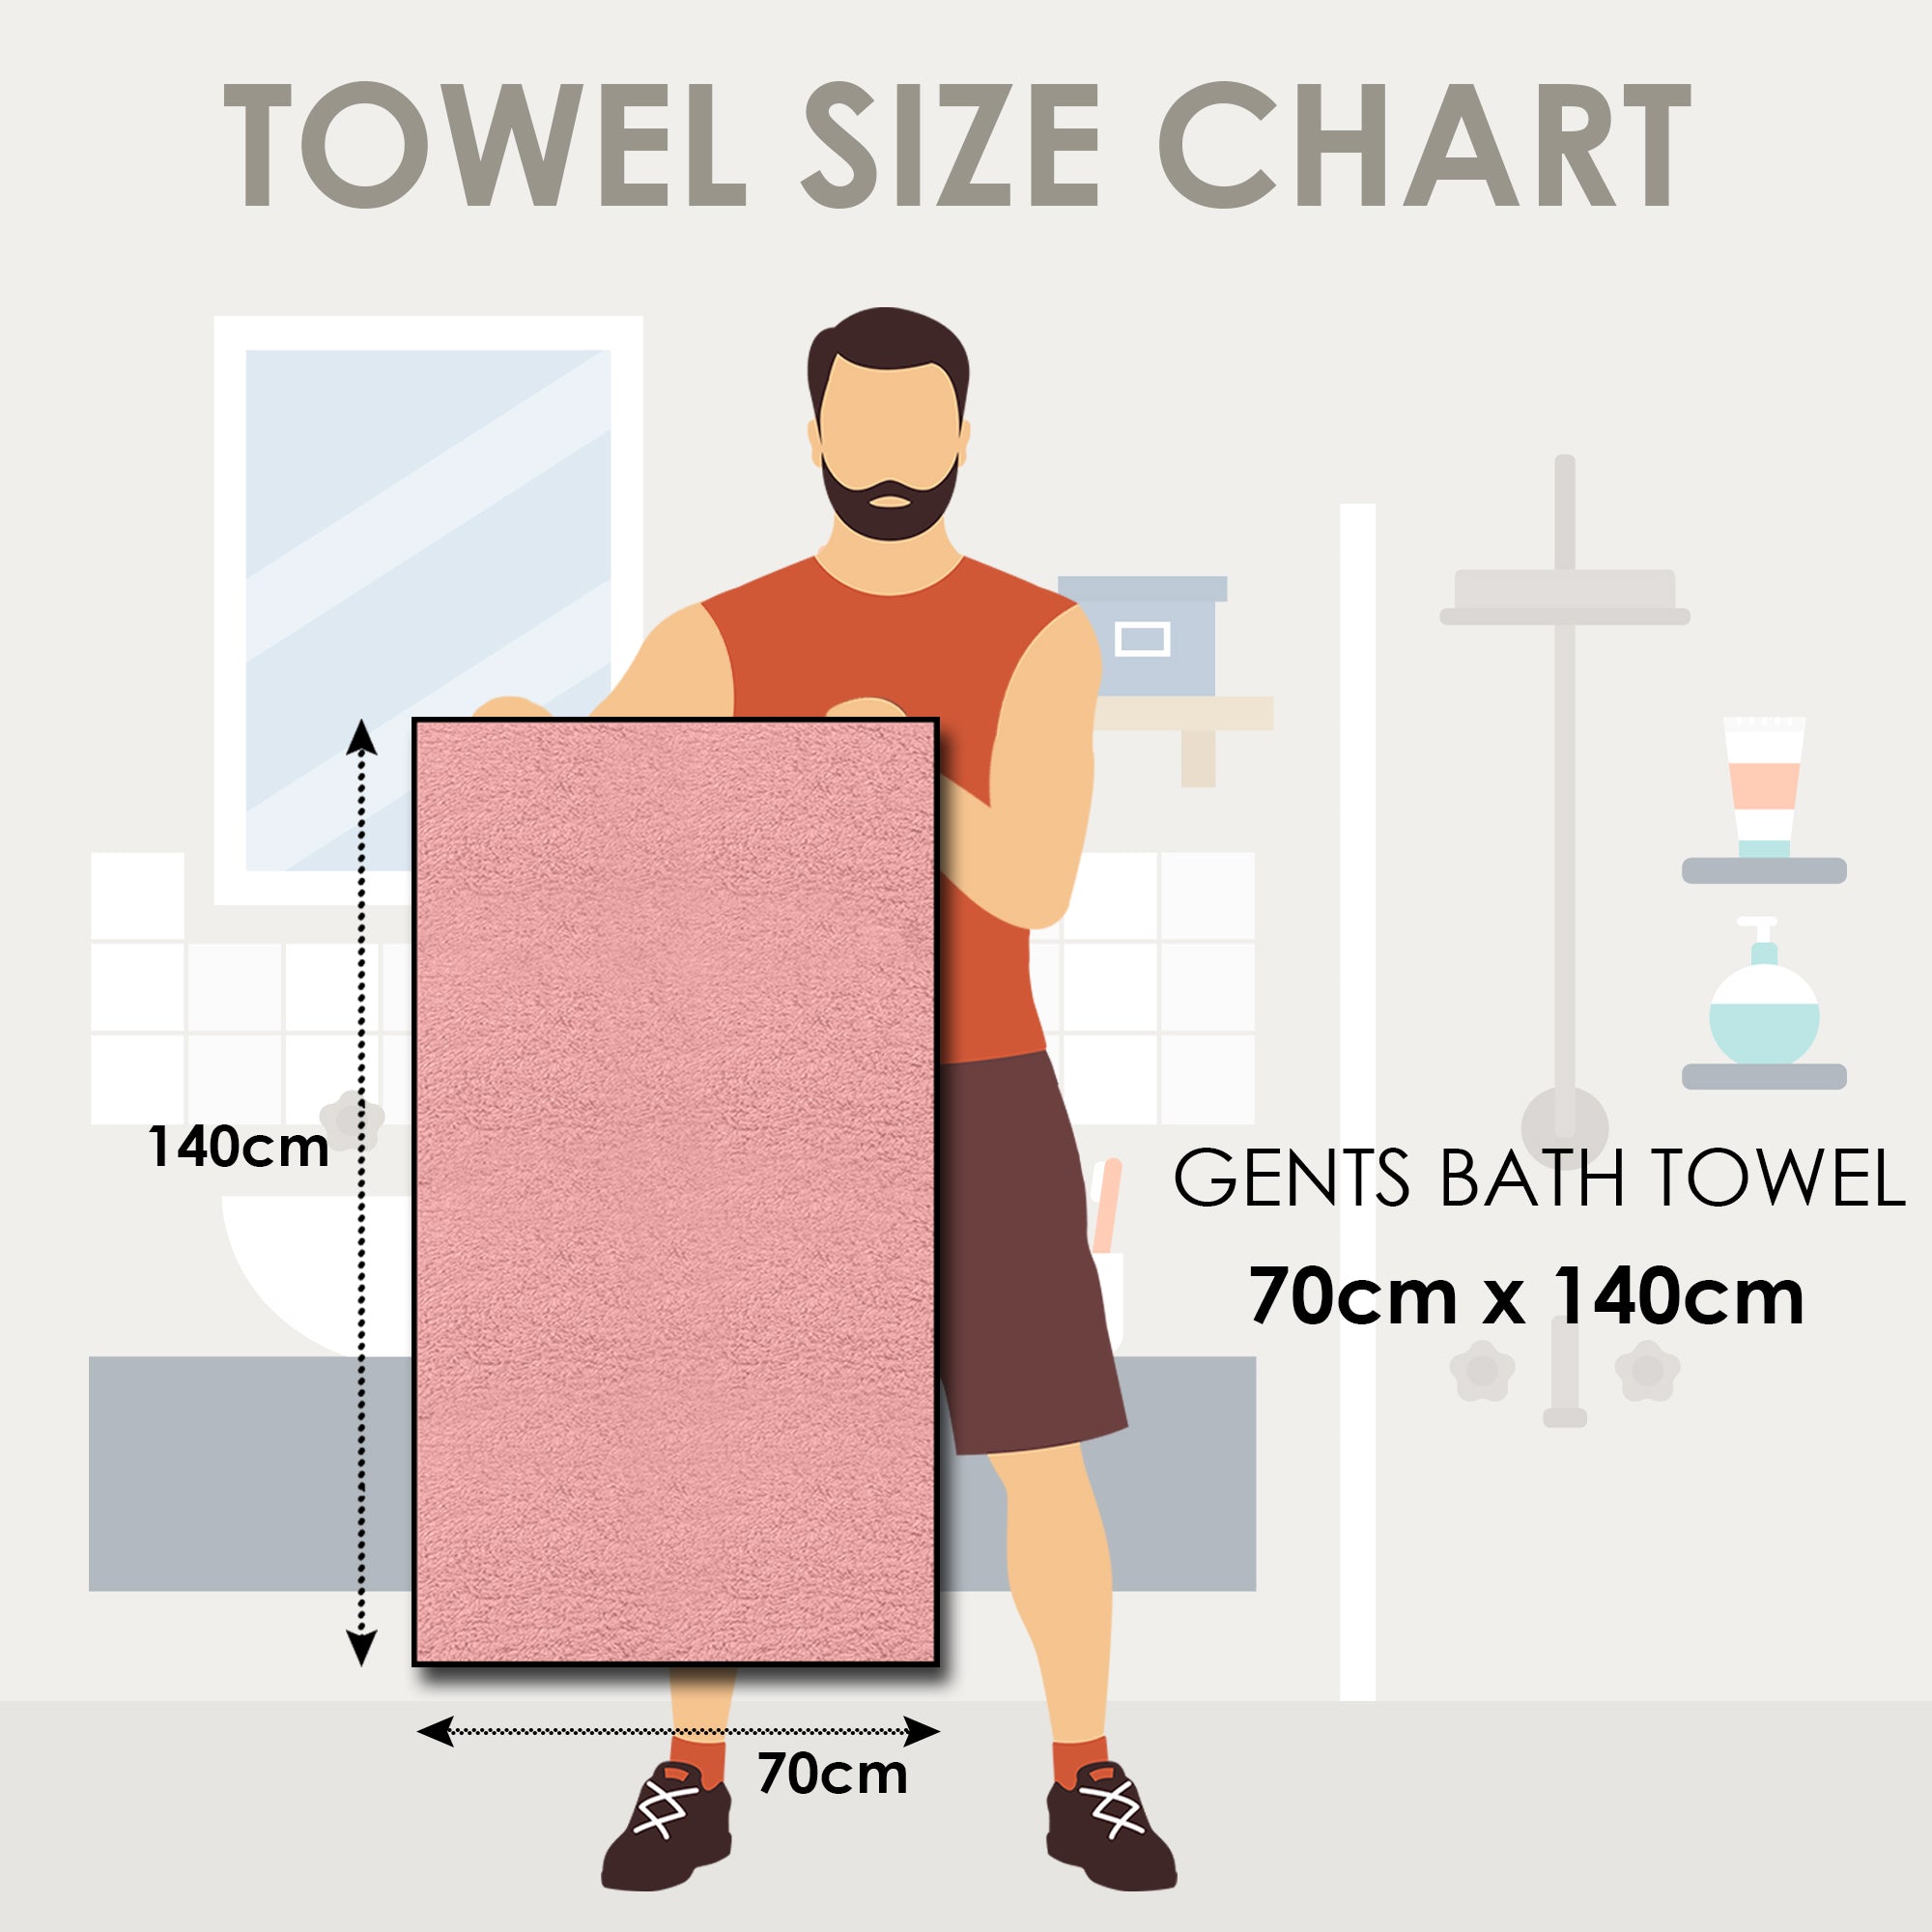 Story@Home 2 Units 100% Cotton Bath Towels - Wine Red and Blue